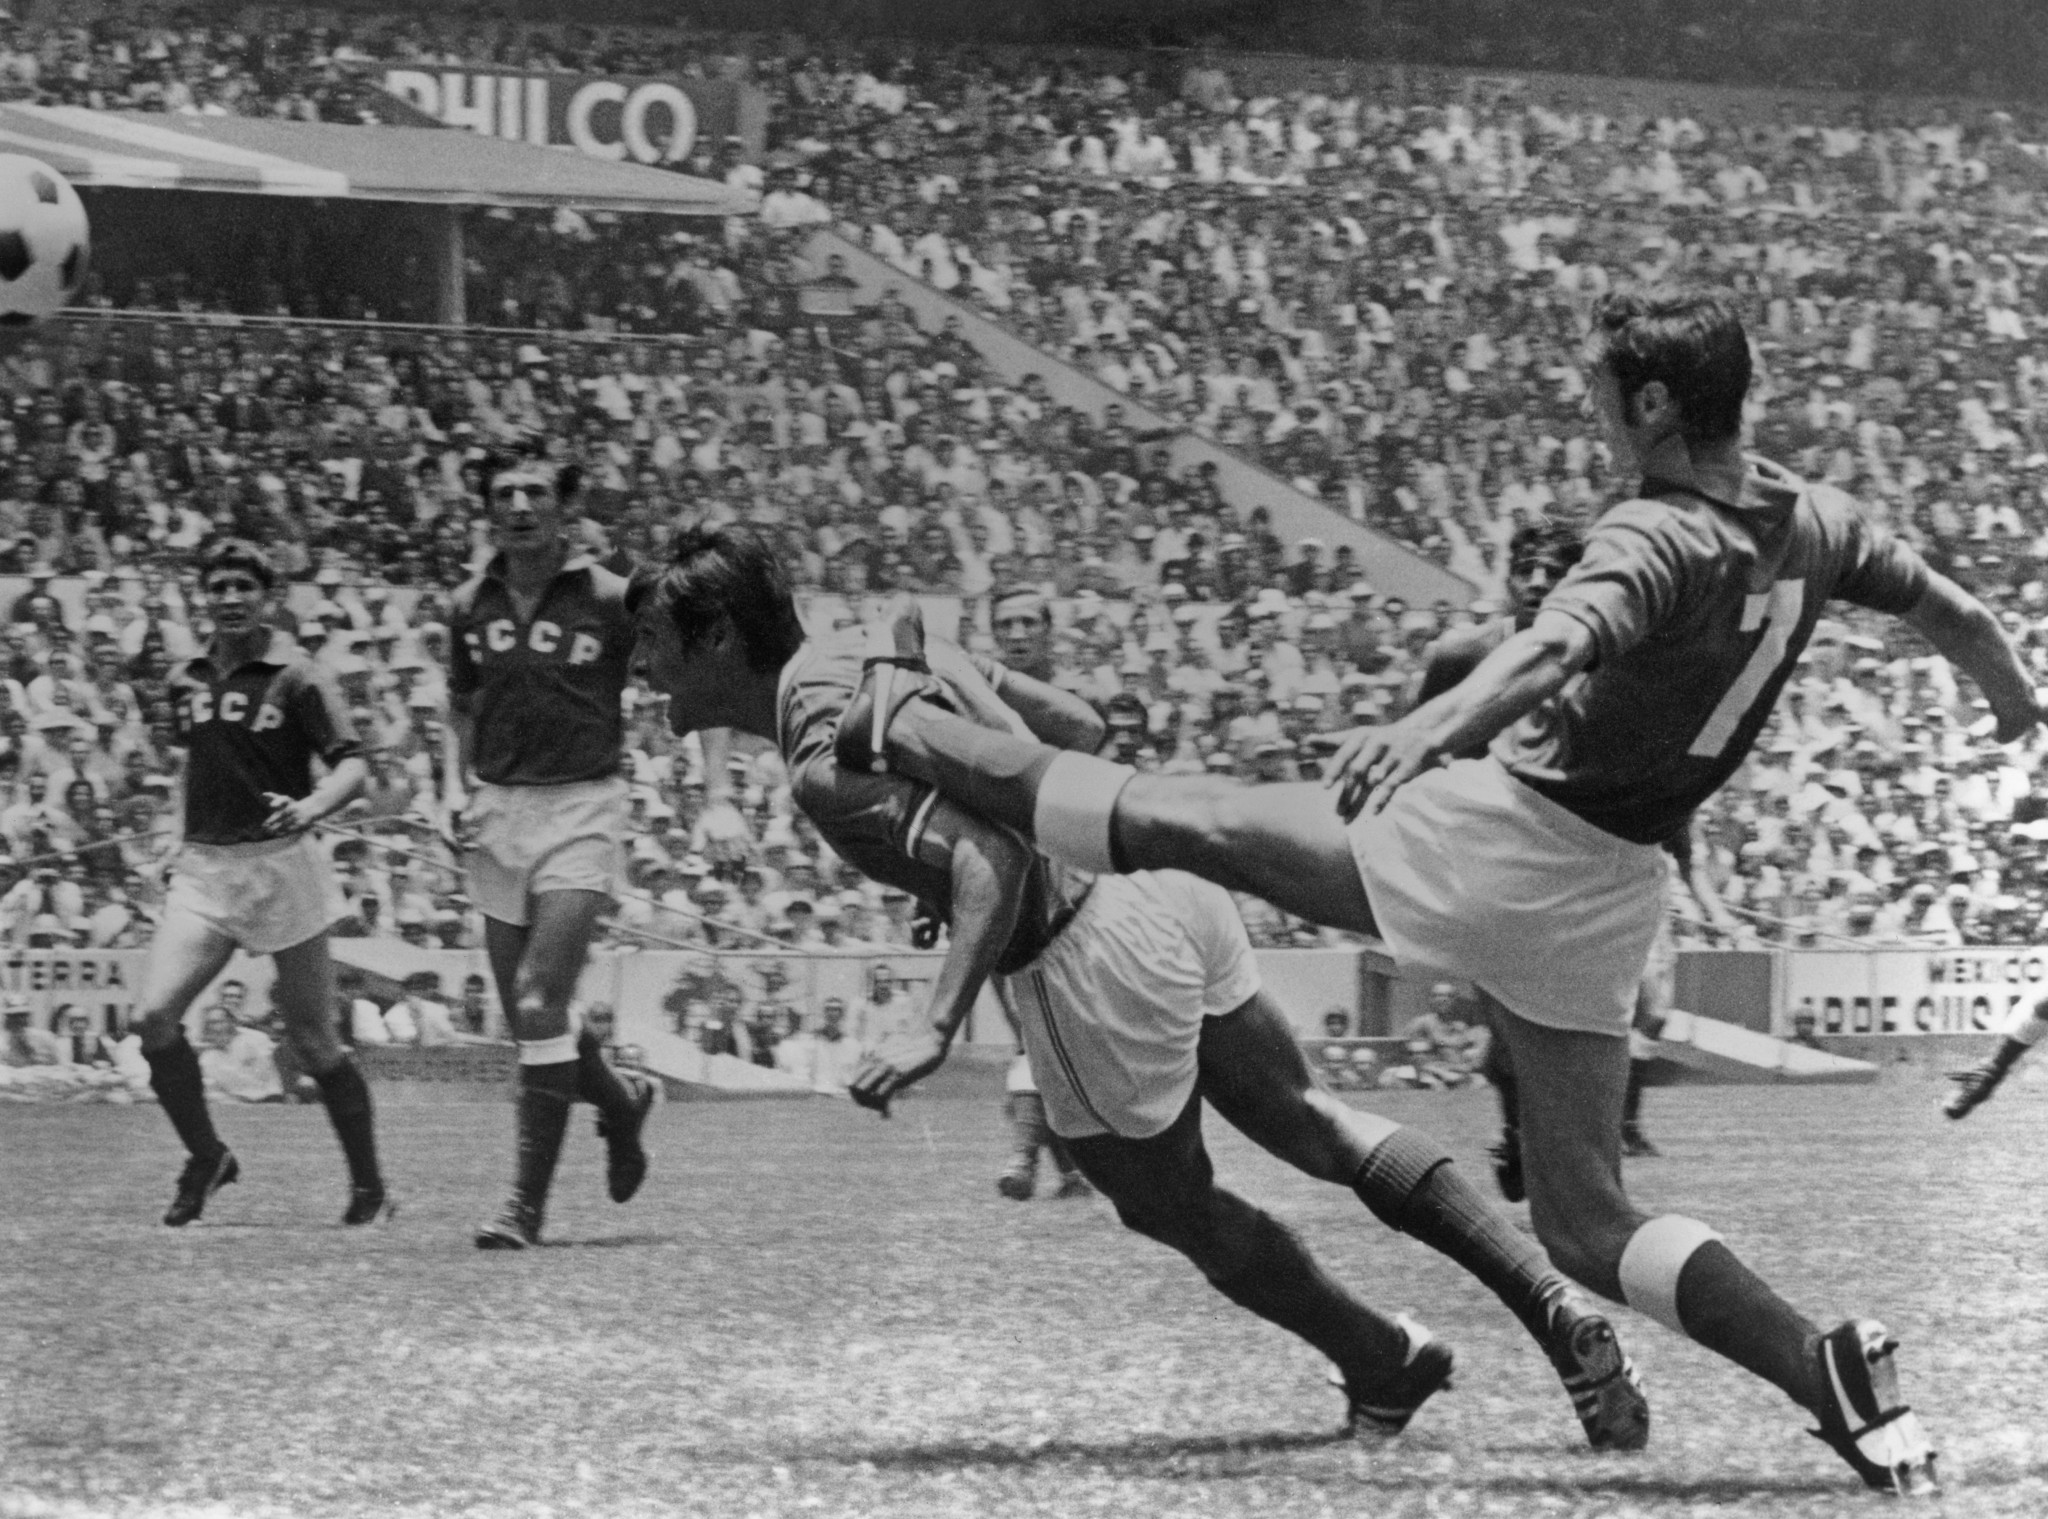 Mexico attack unsuccessfully against the Soviet Union in the opening match of the 1970 World Cup which ended 0-0 ©Getty Images